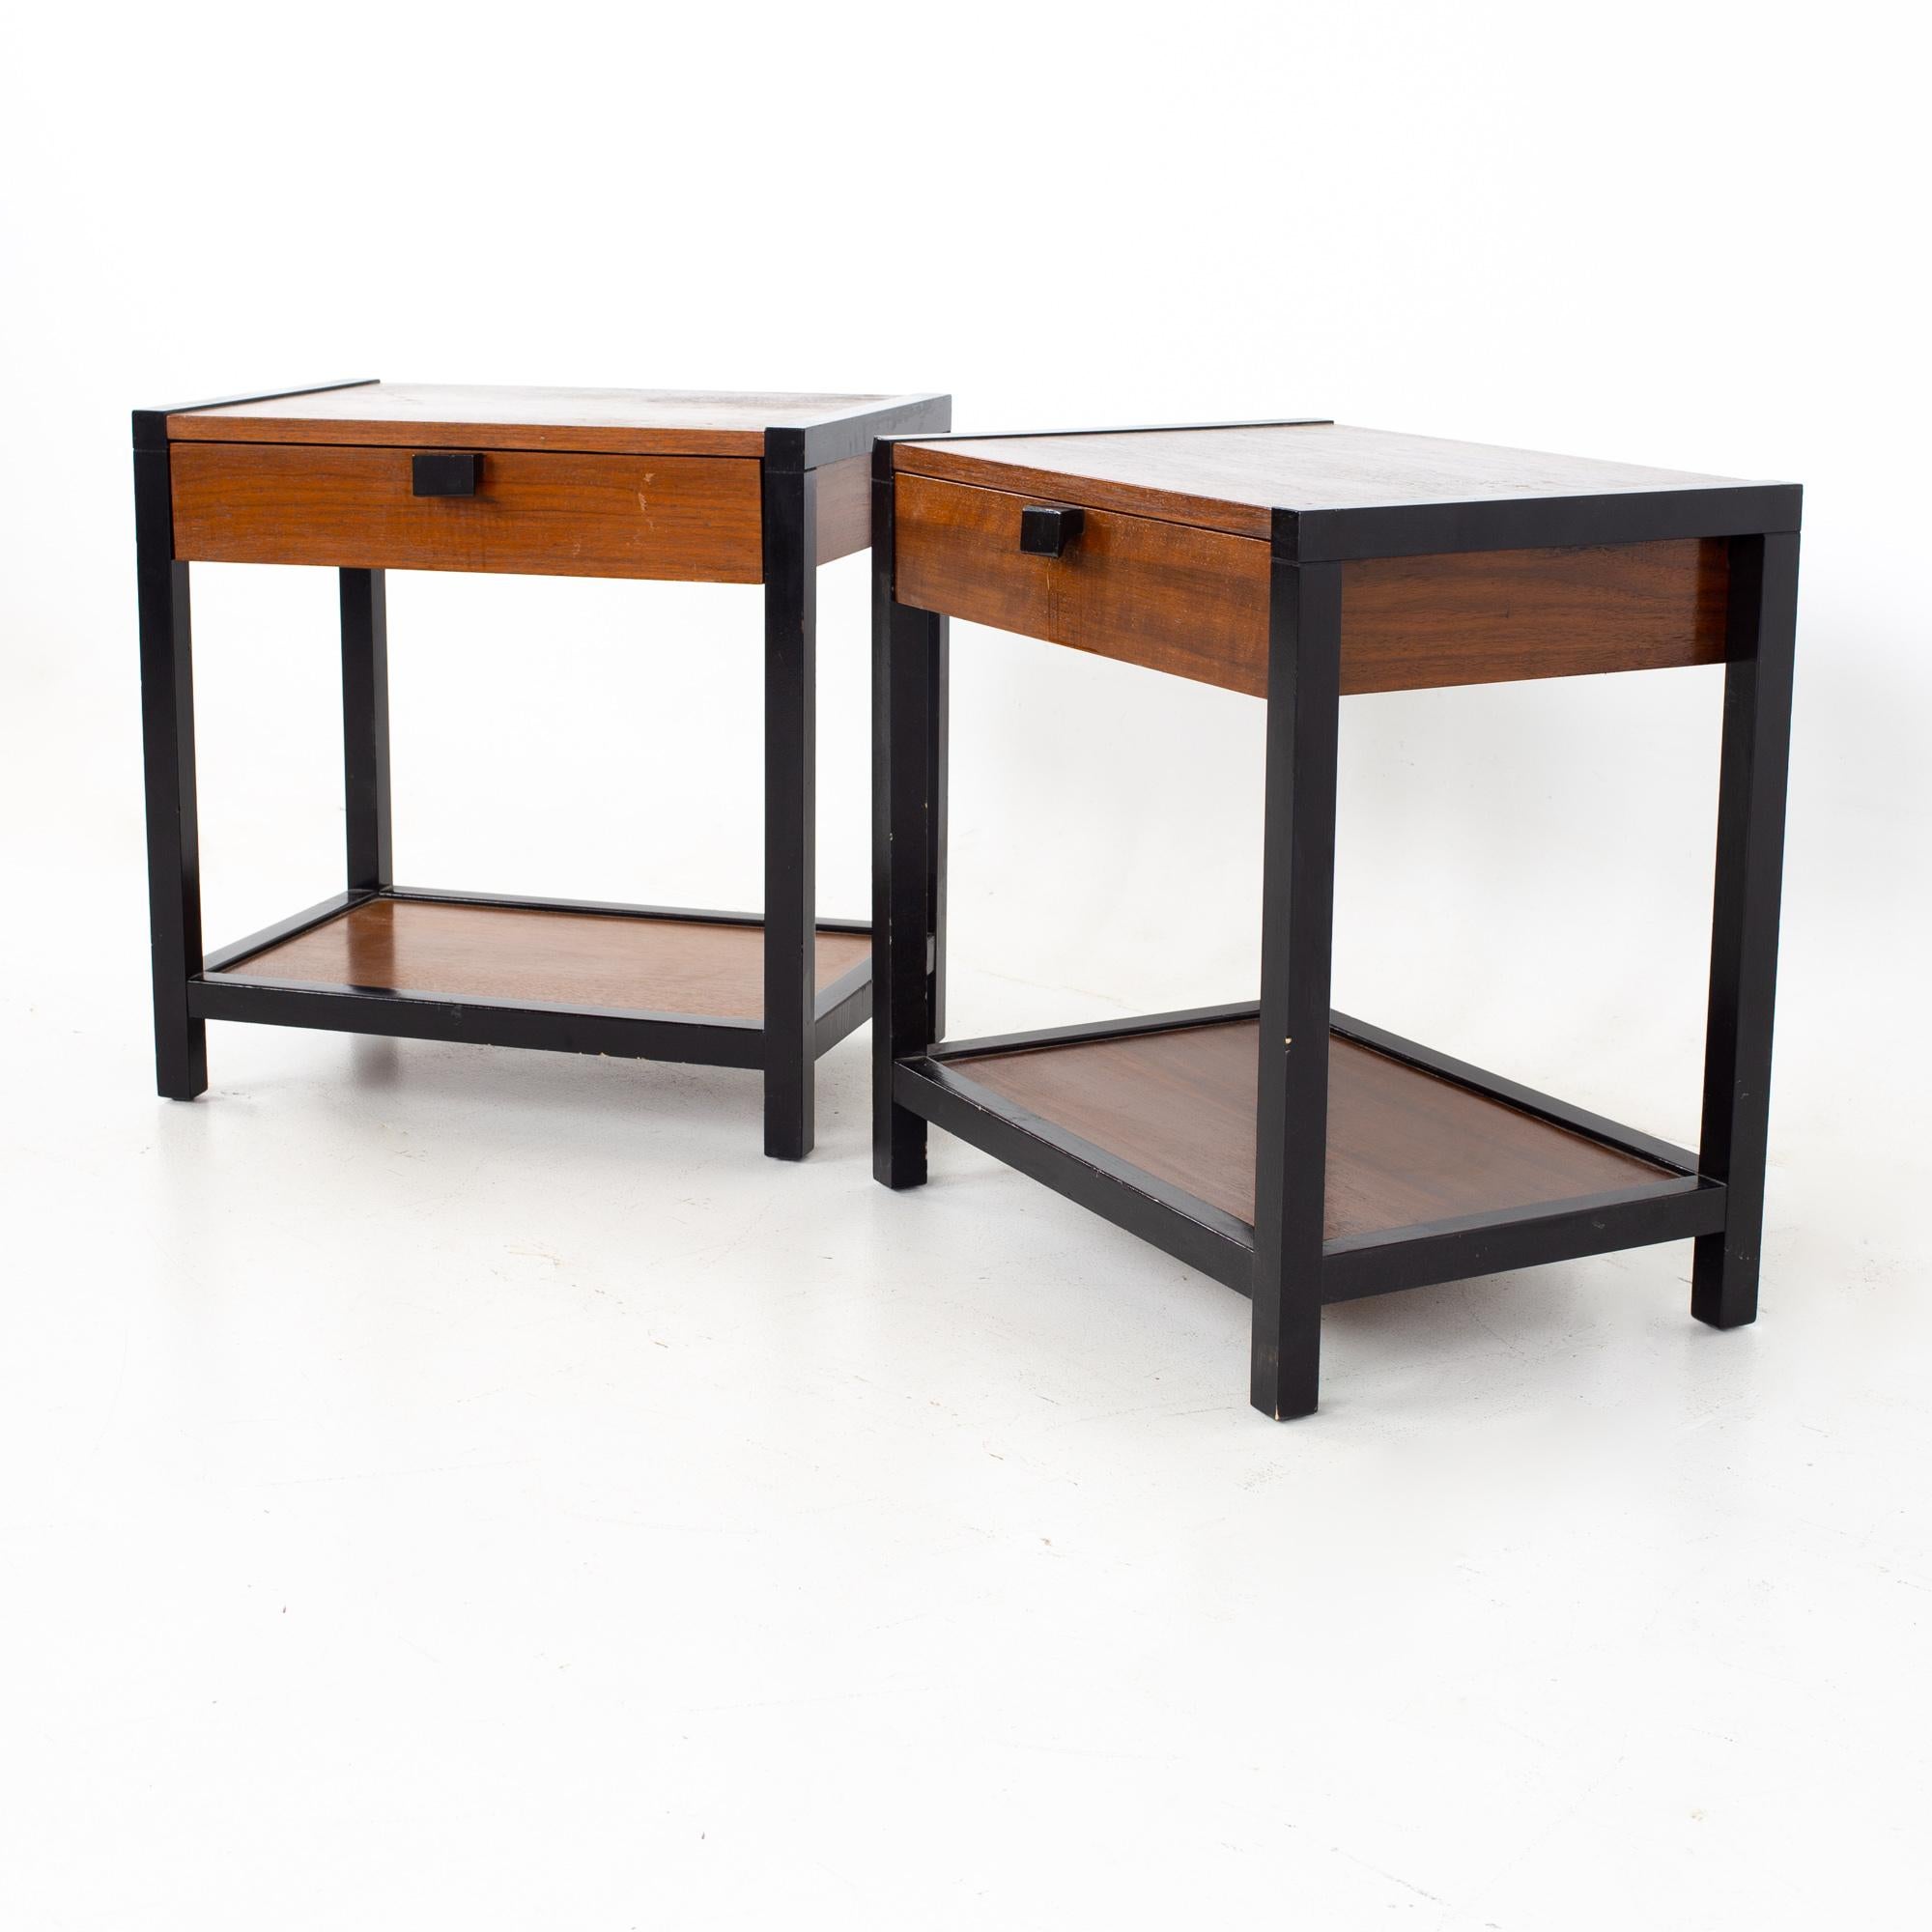 Milo Baughman for Directional mid century nightstands - a pair
Each nightstand measures: 22 wide x 15 deep x 22 inches high

All pieces of furniture can be had in what we call restored vintage condition. That means the piece is restored upon